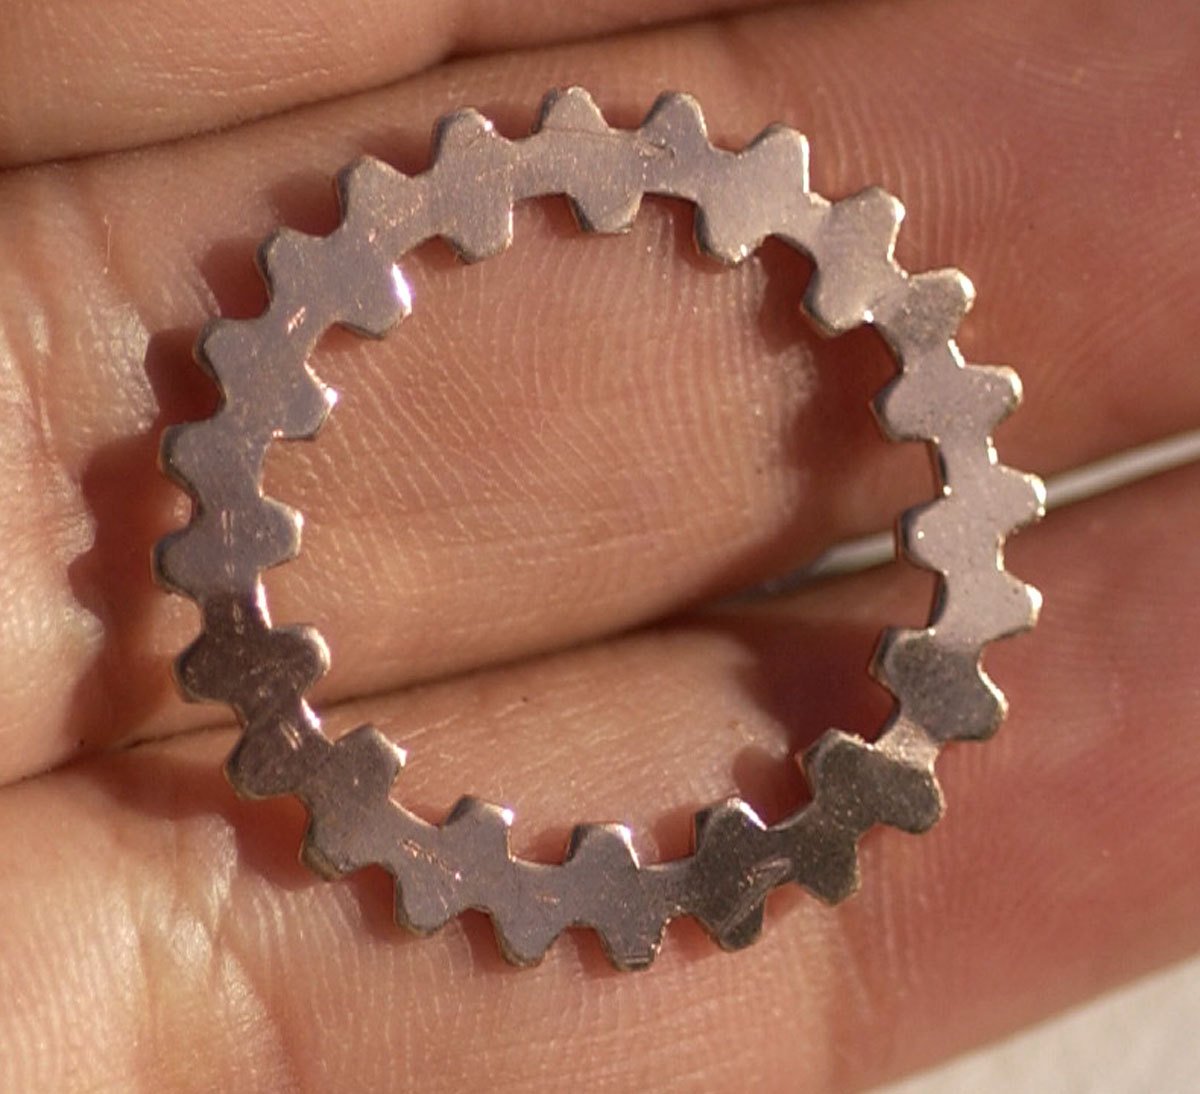 Copper or Nickel Silver 25mm Gear Cog with 19mm 24g Blanks Cutout for Enameling Stamping Texturing - 6 pieces